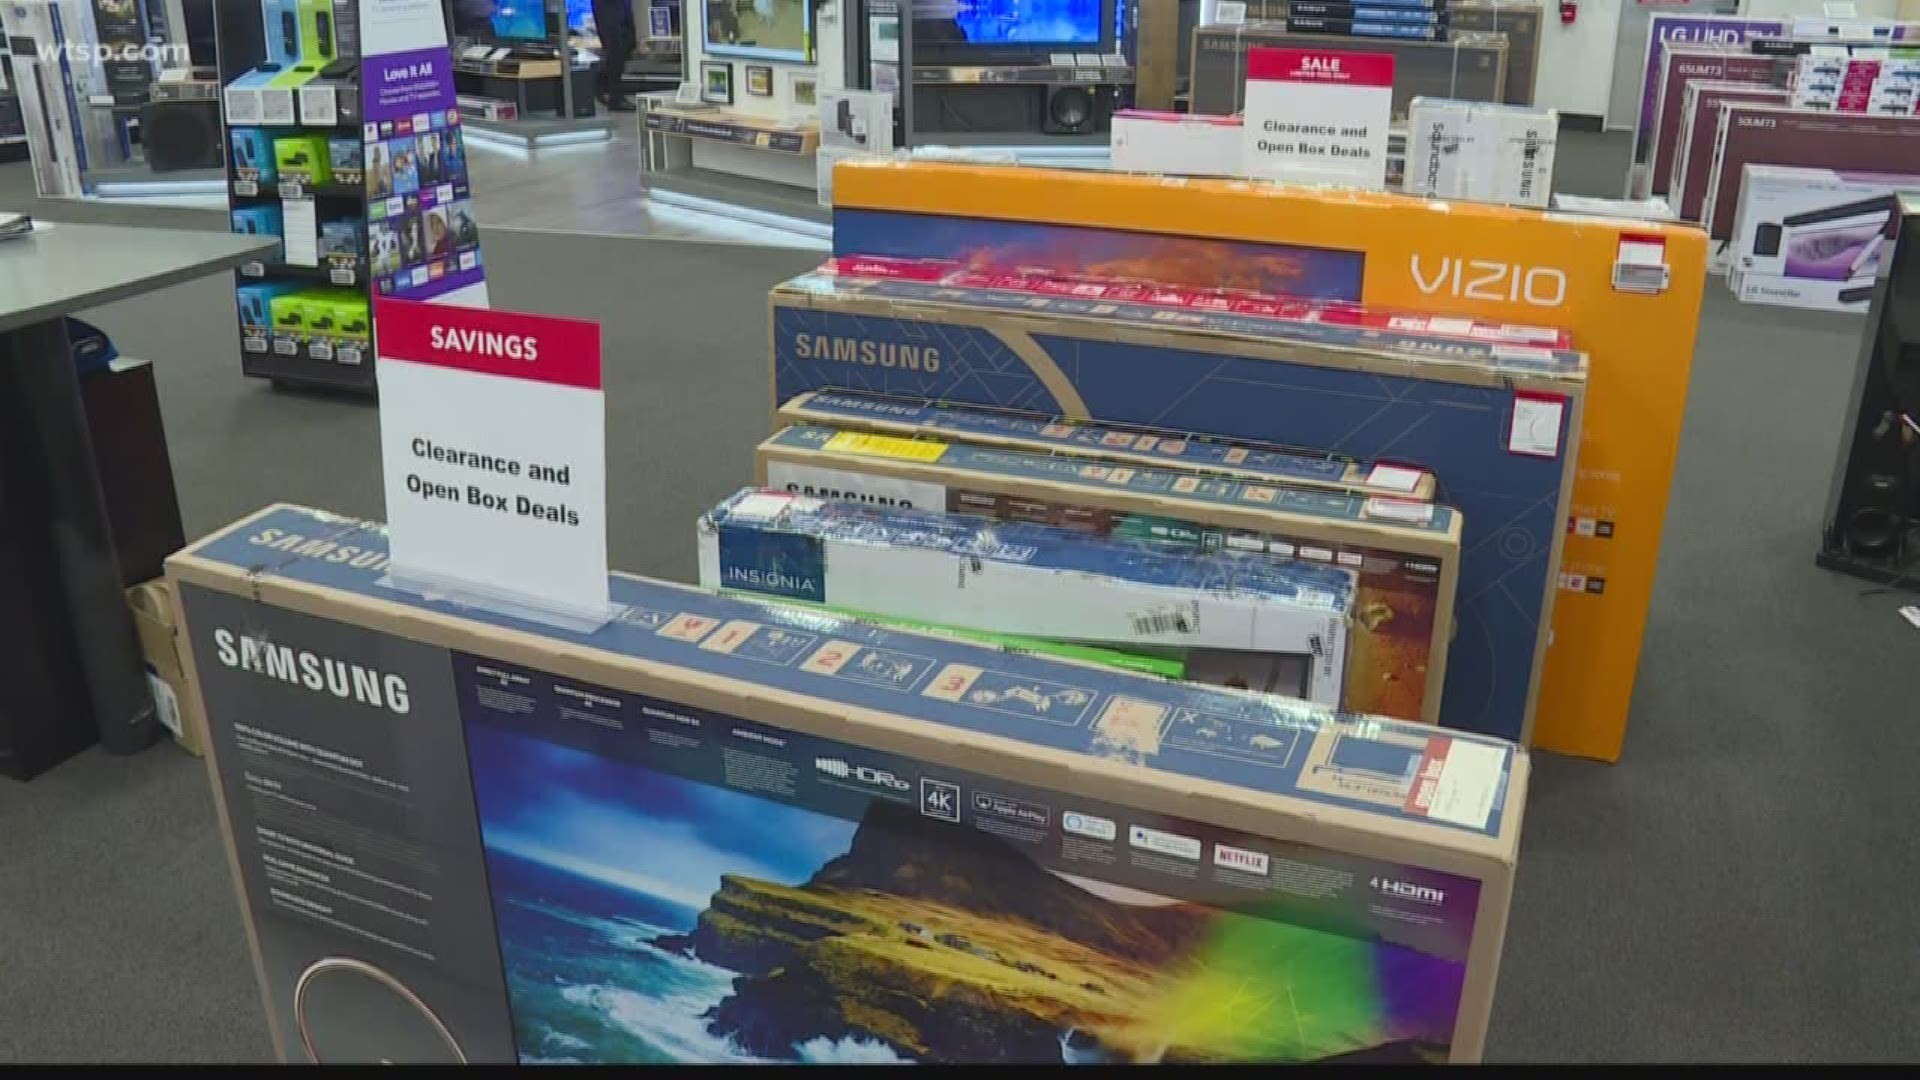 Seventeen percent of Americans will buy a new TV this week and spend around $750.